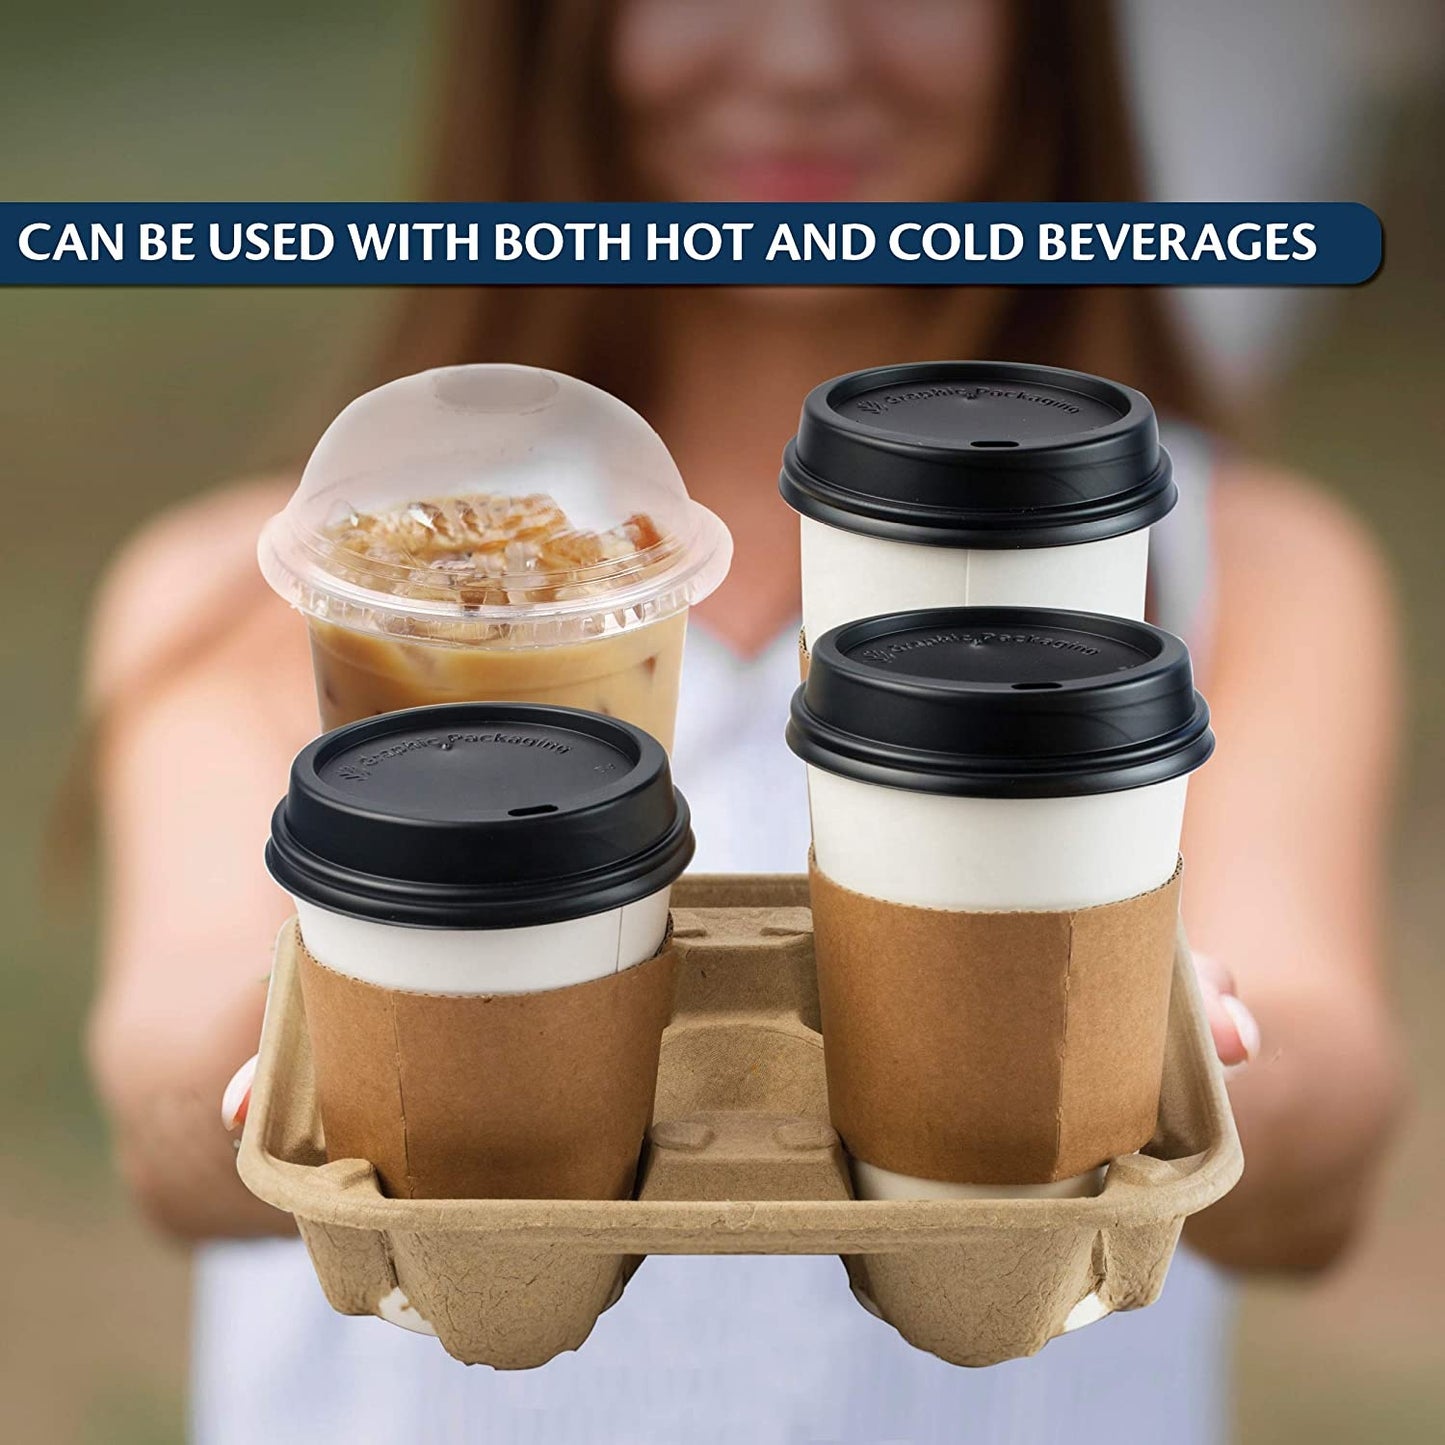 Customize Baggase Biodegradable Paper Cup Holder Takeout Cup Tray